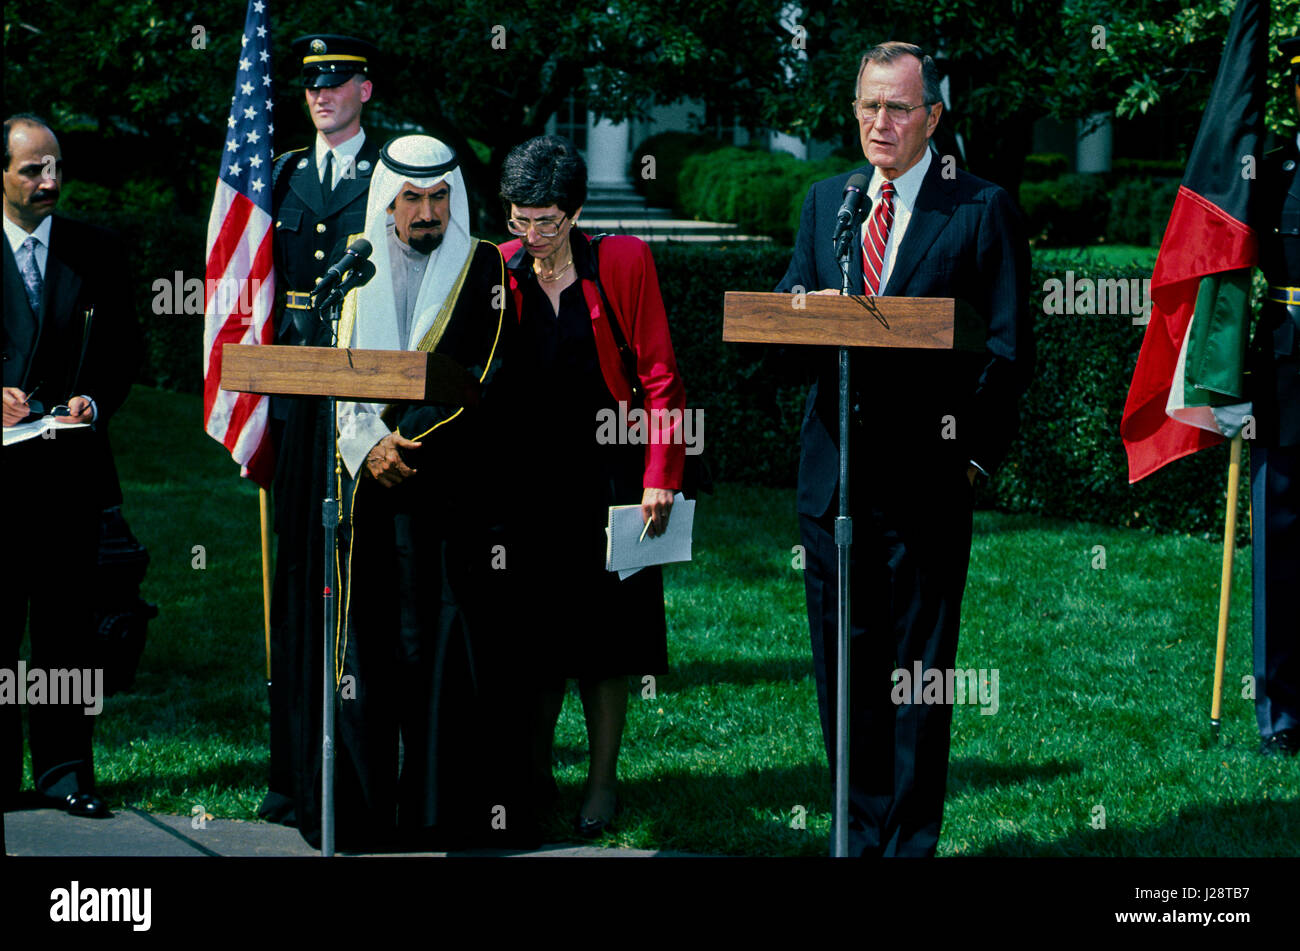 The Amir of Kuwait Sheik Jabir Al-Sabah stands next to President George H.W. Bush as they take questions from reporters on the South Lawn driveway after their meeting earlier in the Oval Office of the White House Washington DC. September 28, 1990.  Photo by Mark Reinstein Stock Photo